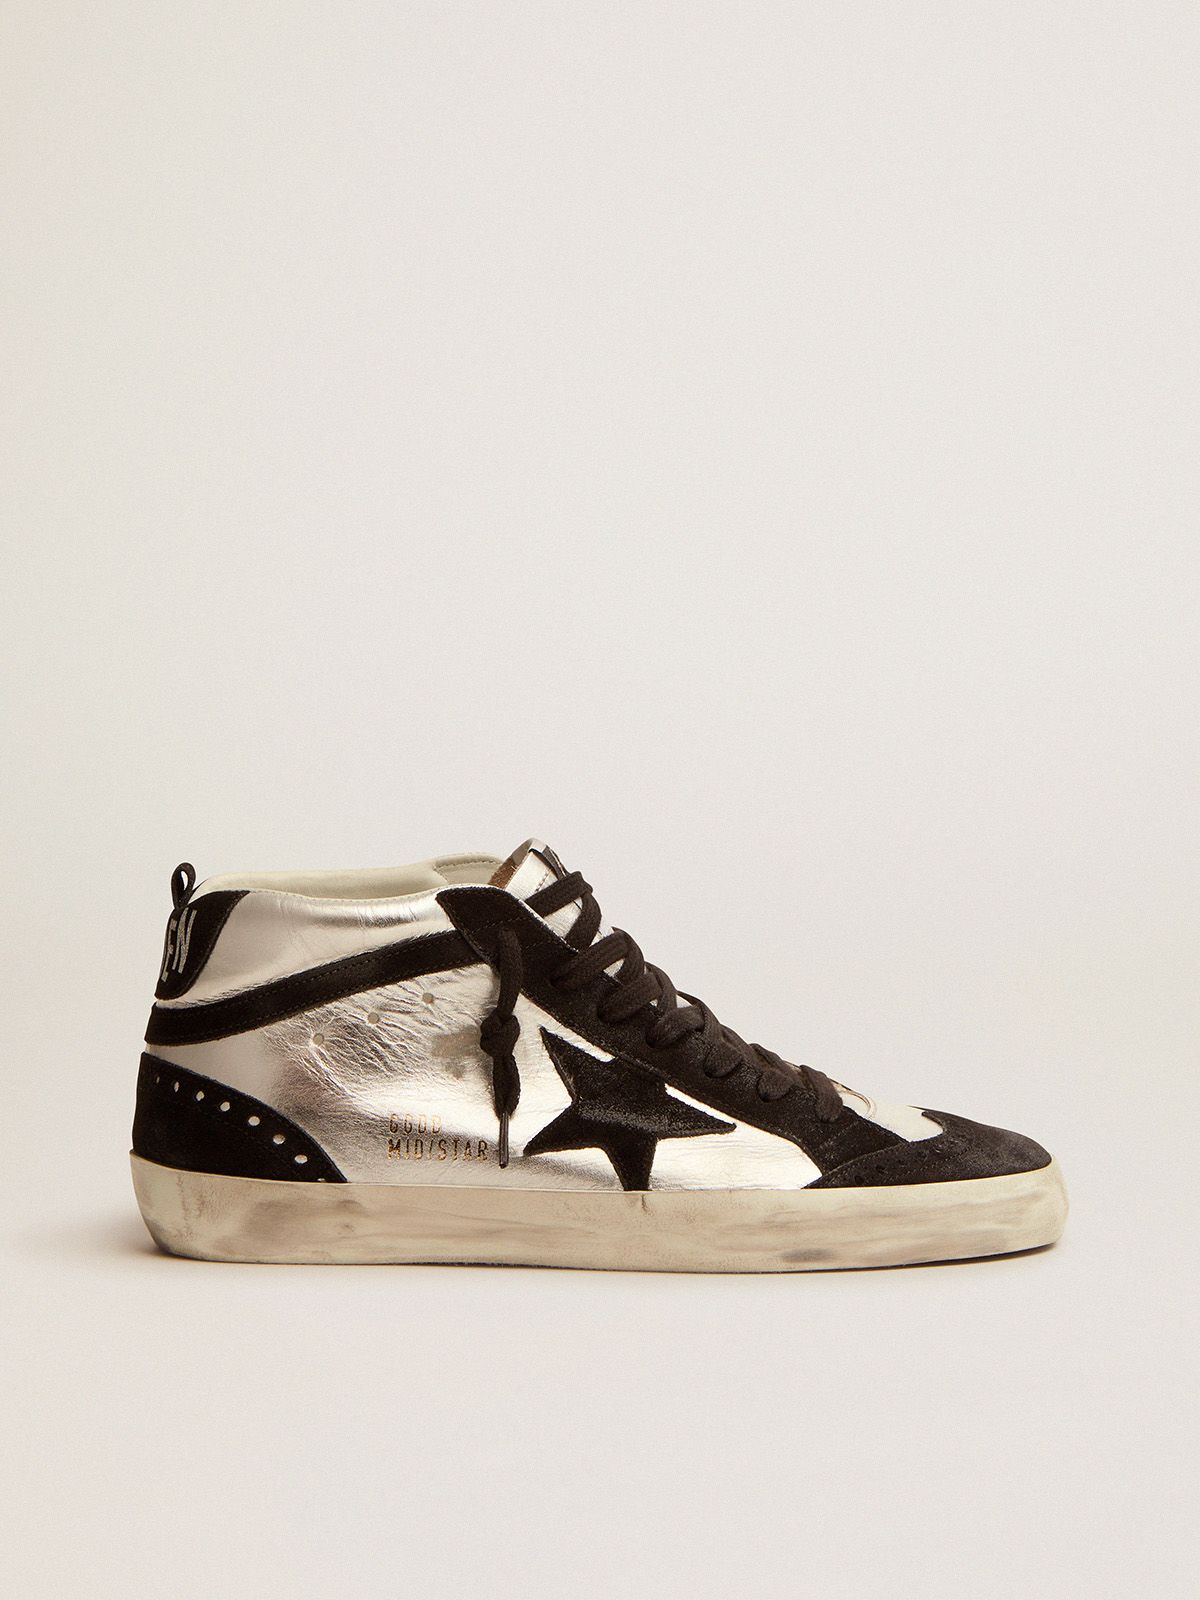 Golden Goose Sneakers Uomo Mid Star LTD sneakers in silver laminated leather and black suede